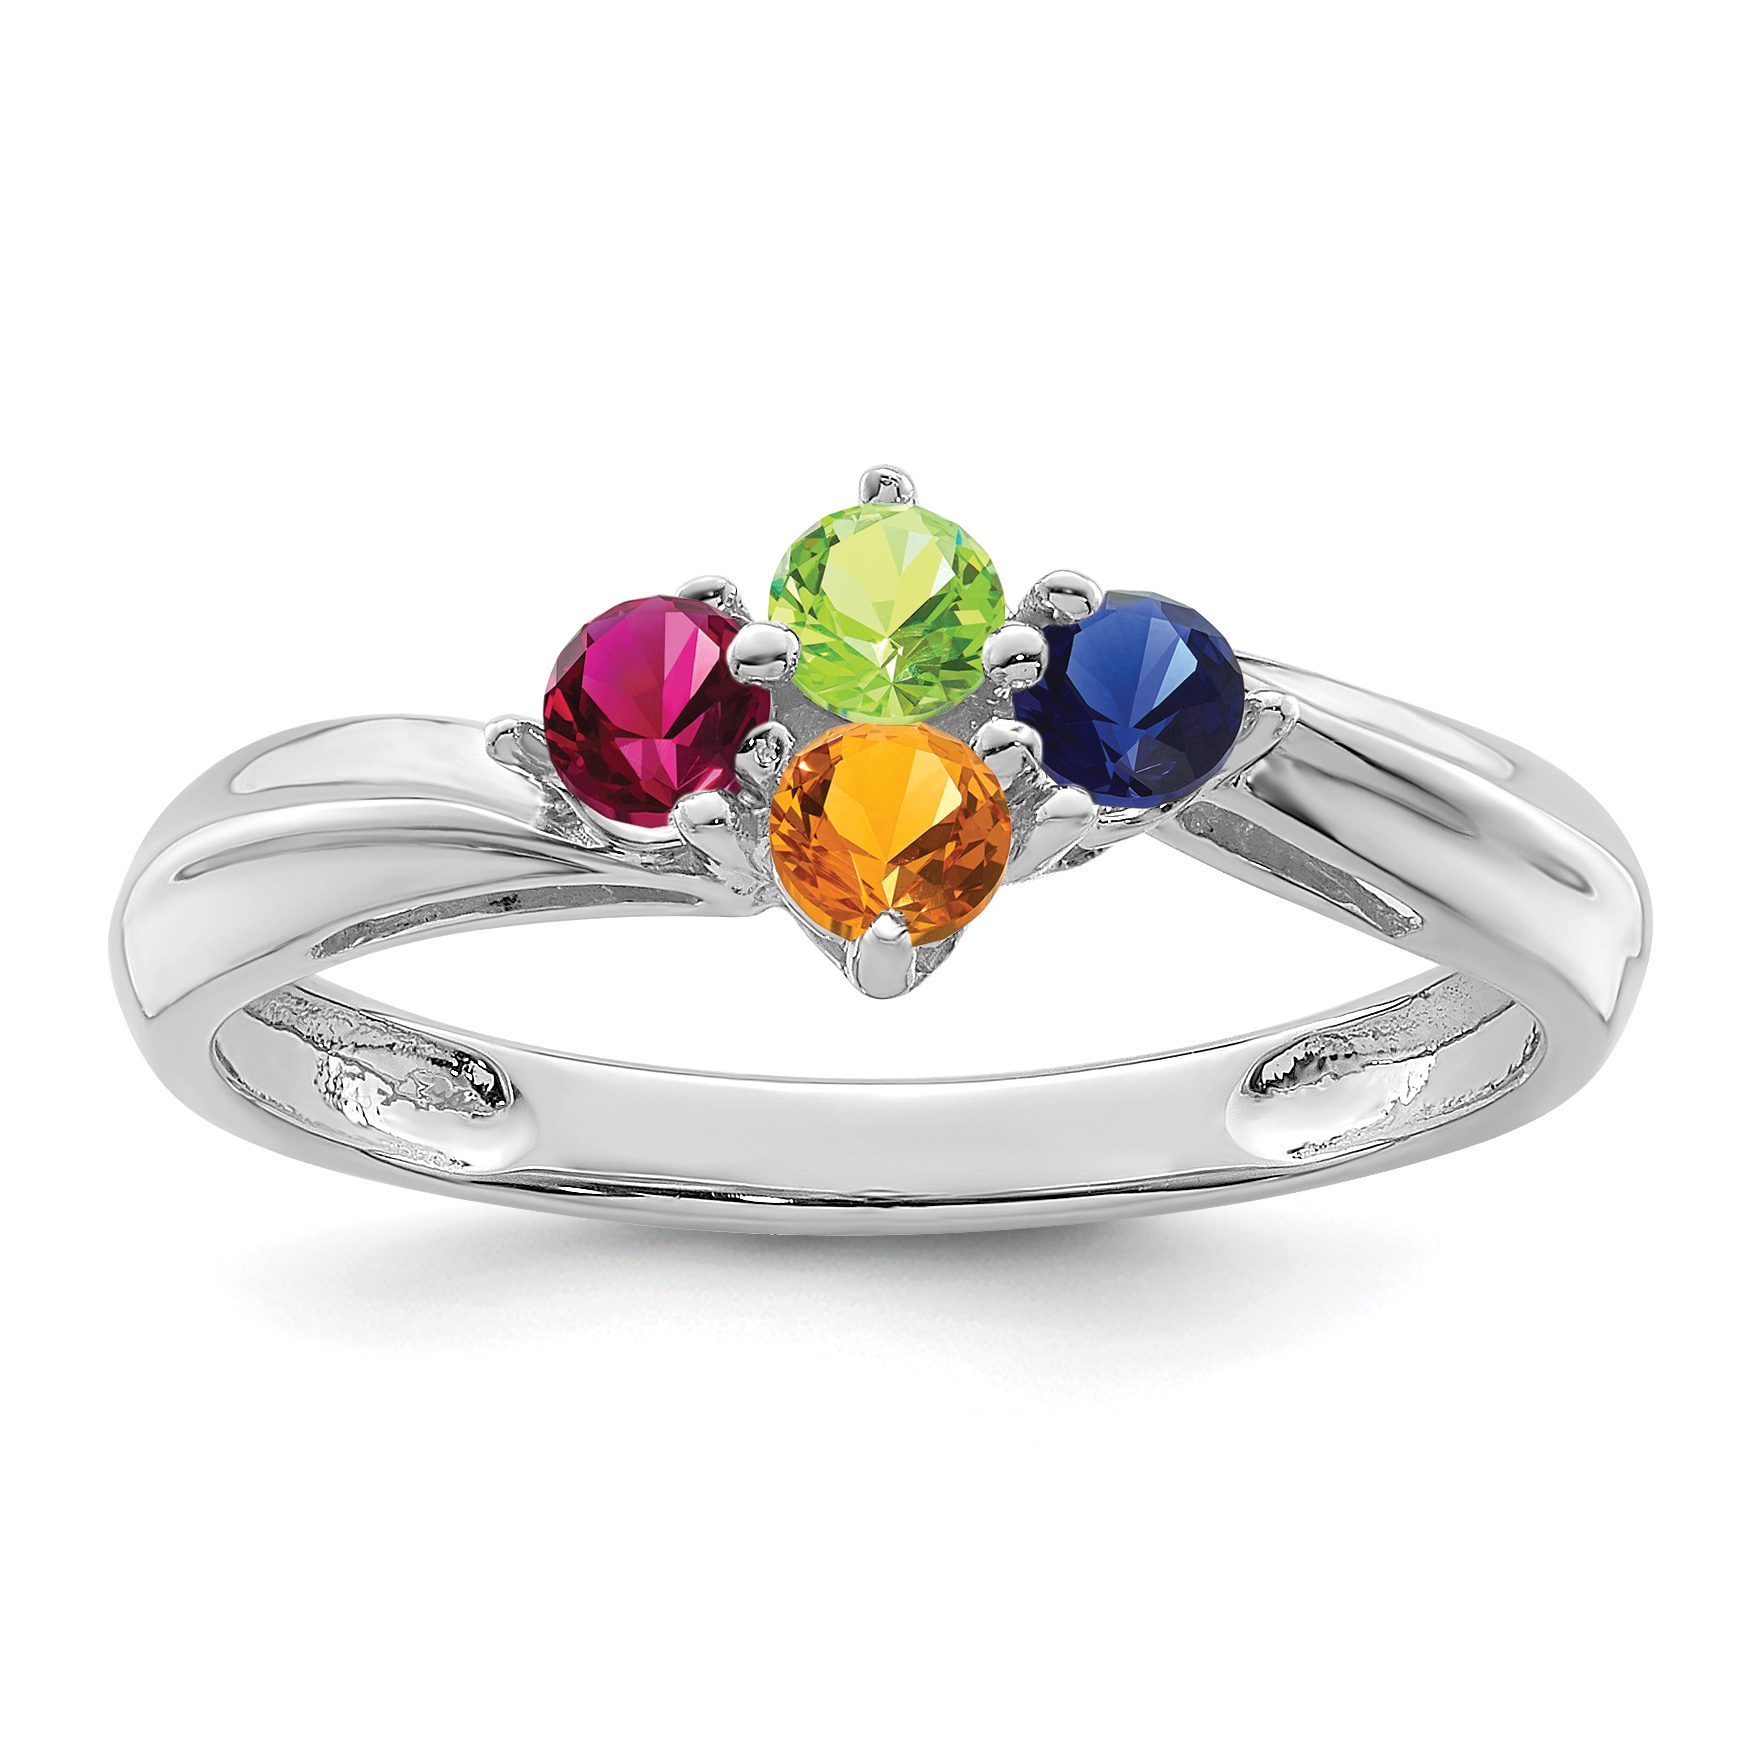 Family Celebration Sterling Silver Synthetic 4 Stone Mother's Ring